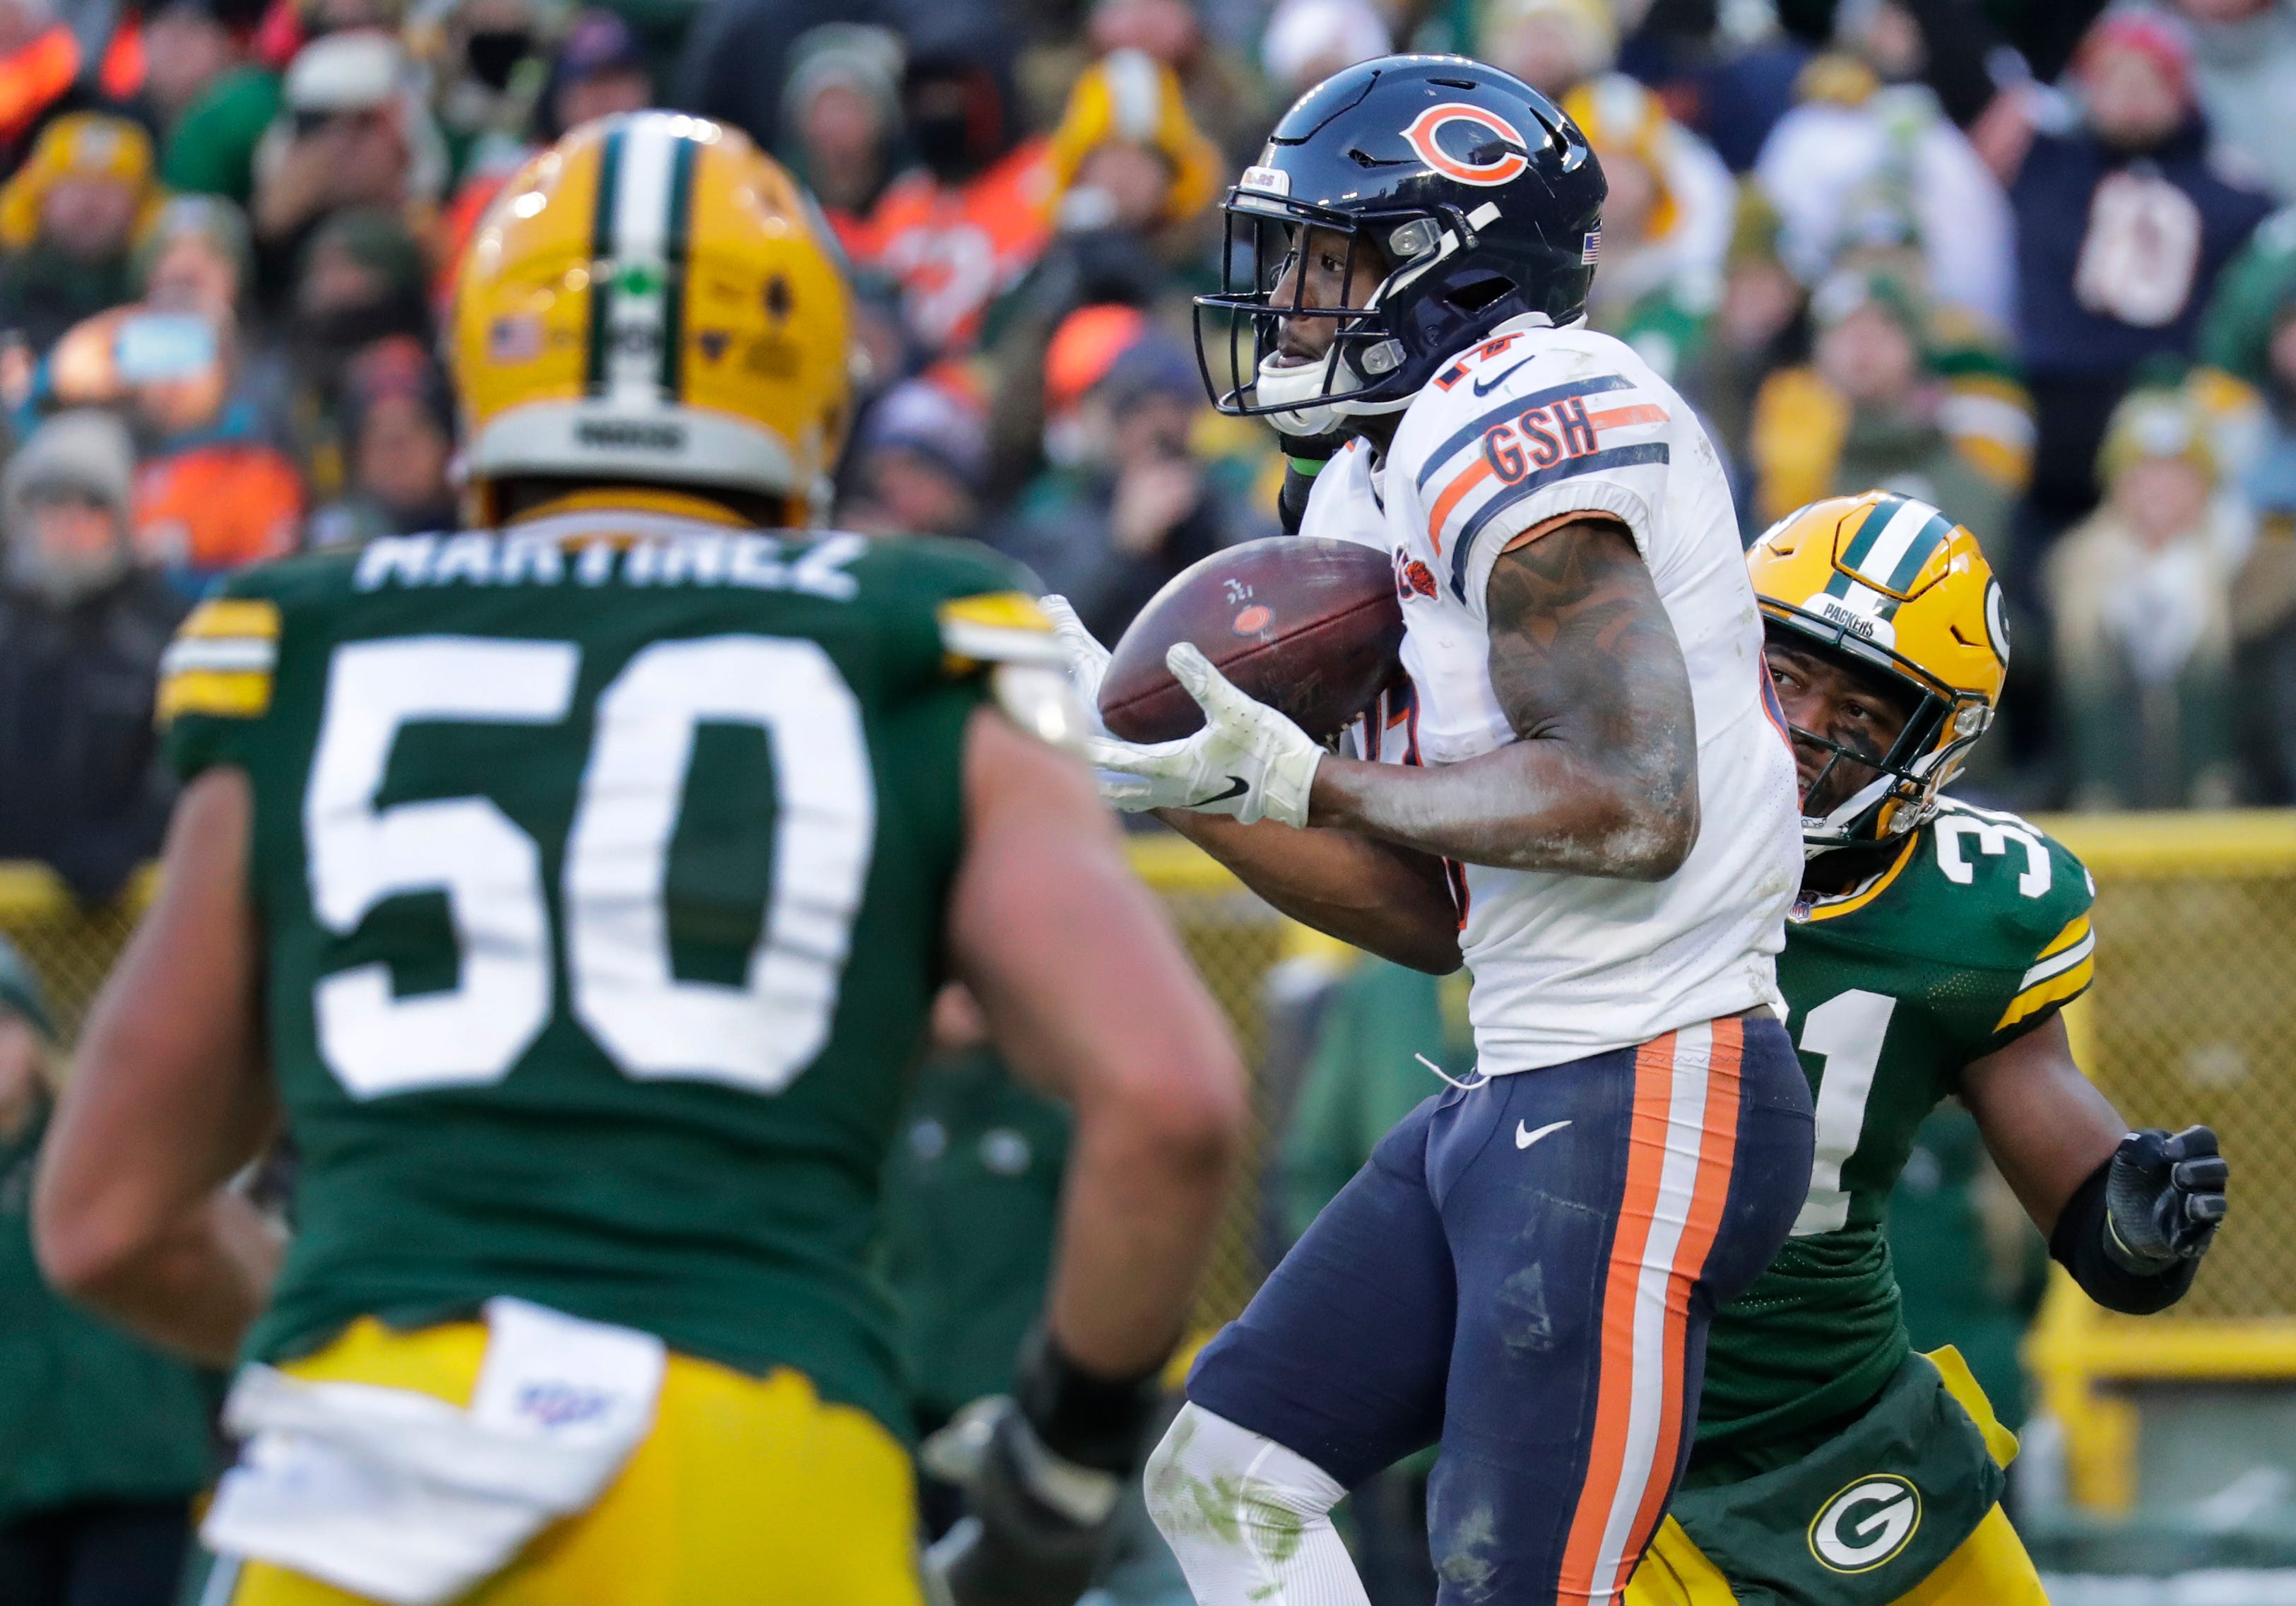 Chicago Bears wide receiver Anthony Miller (17) scores a touchdown in front of Green Bay Packers inside linebacker Blake Martinez (50) and Adrian Amos (31) in the fourth quarter Sunday, December 15, 2019, at Lambeau Field in Green Bay, Wis.